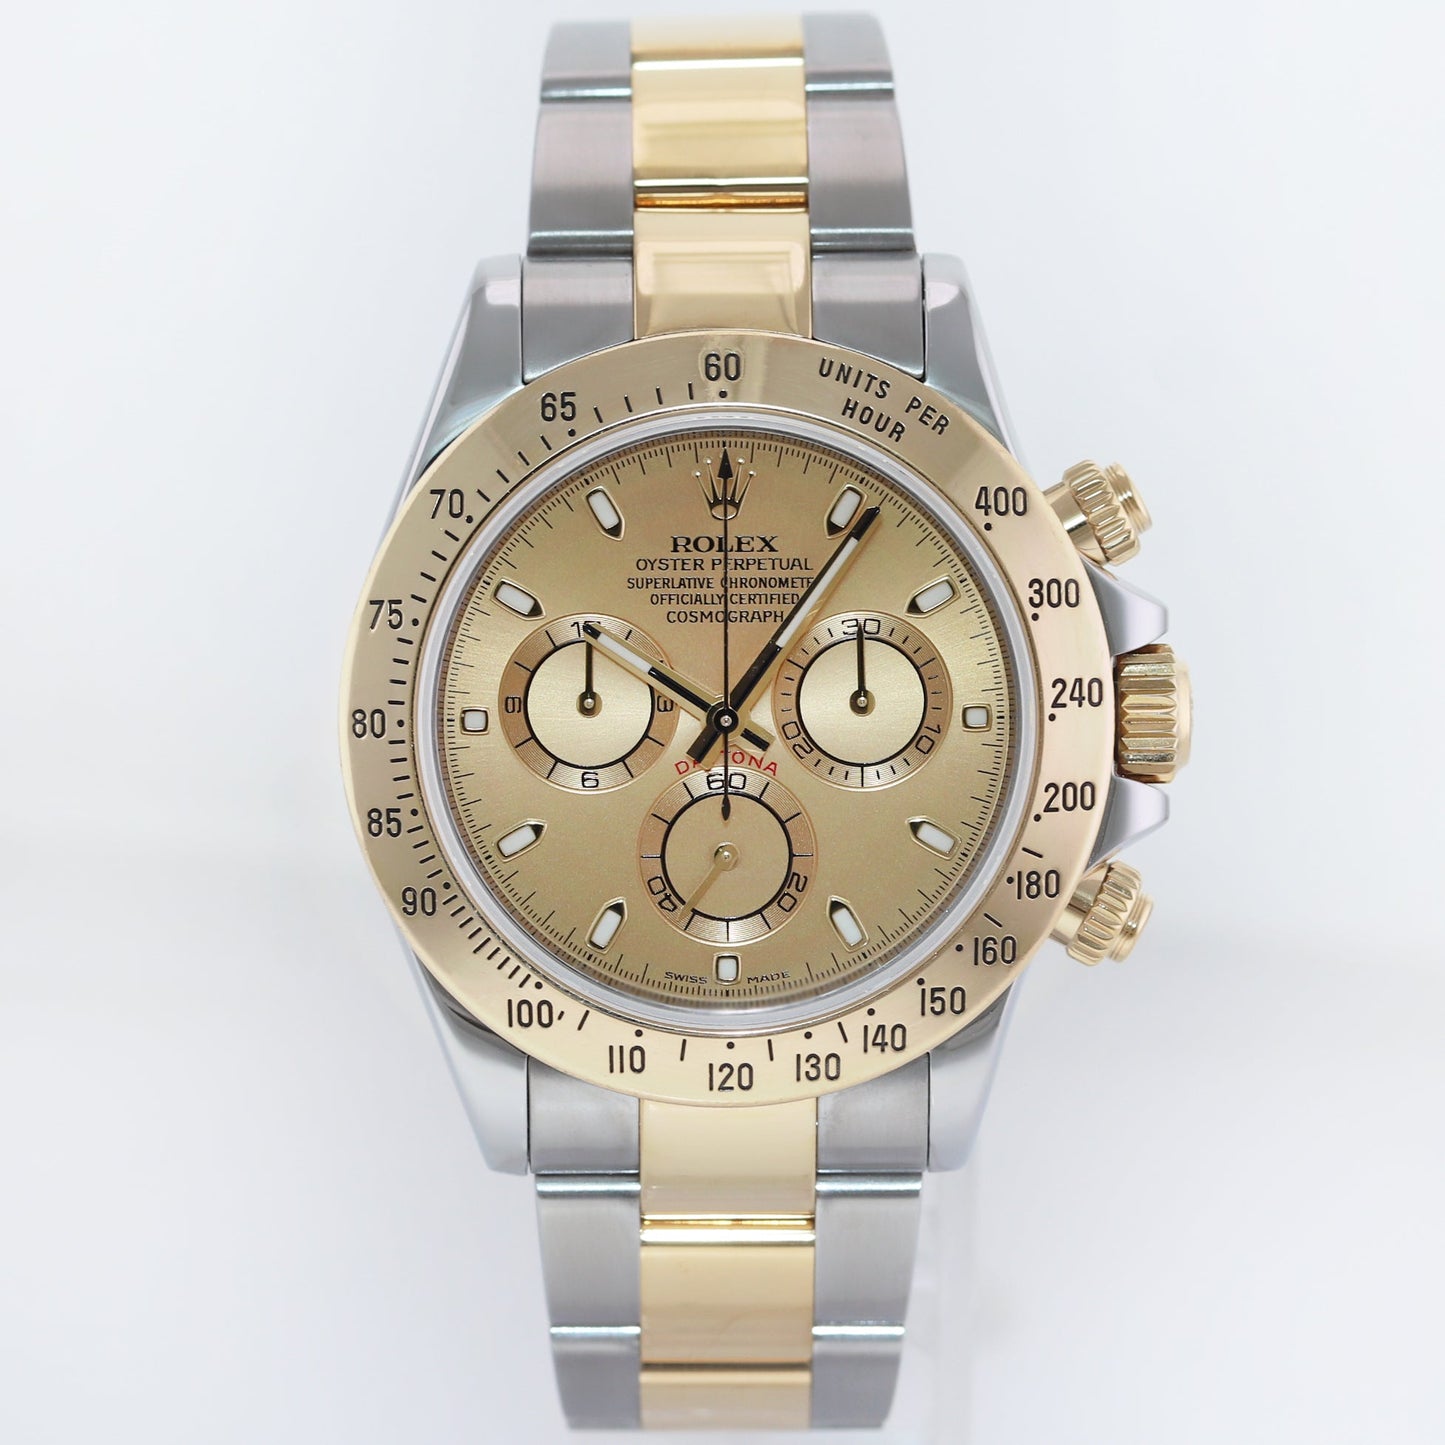 2013 PAPERS MINT Rolex Daytona 116523 Chronograph Champagne Steel Gold Two Tone Watch